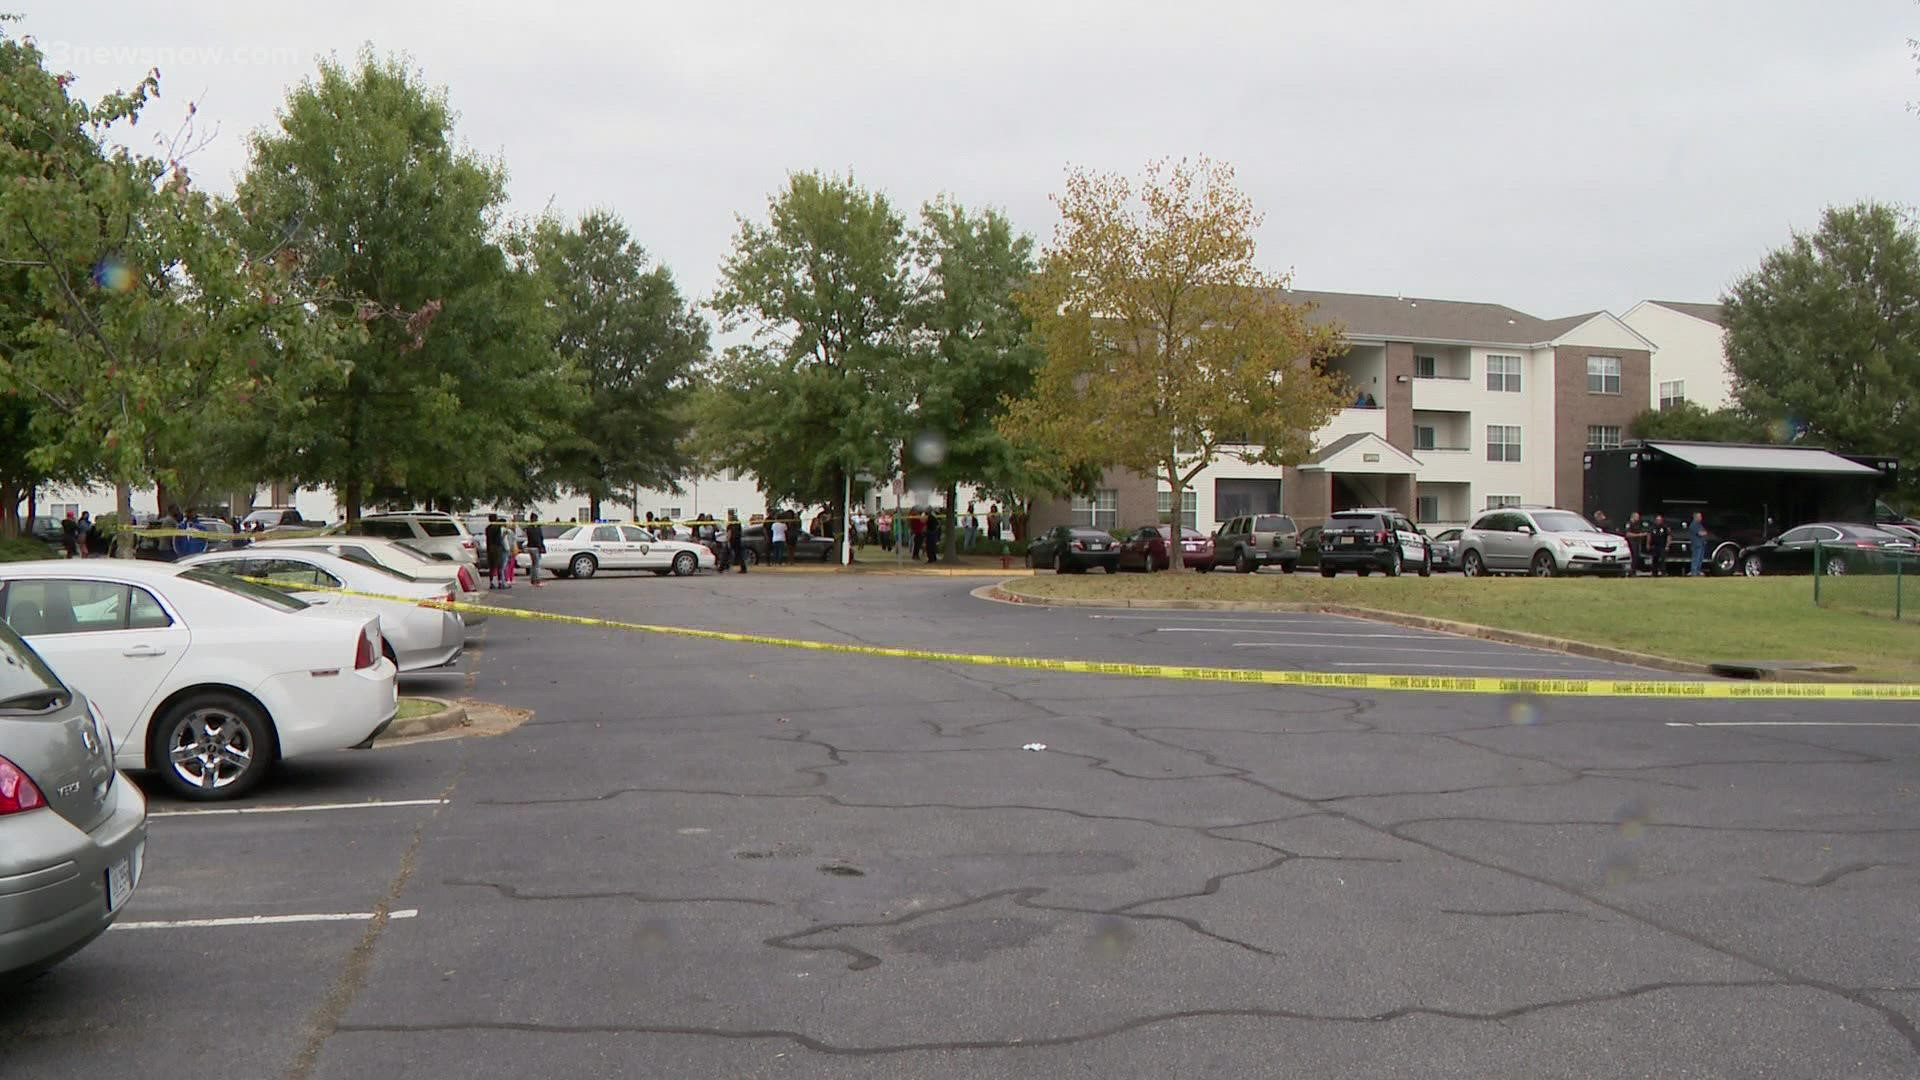 Chesapeake Police say the victim was found shot and killed inside a car Saturday afternoon.